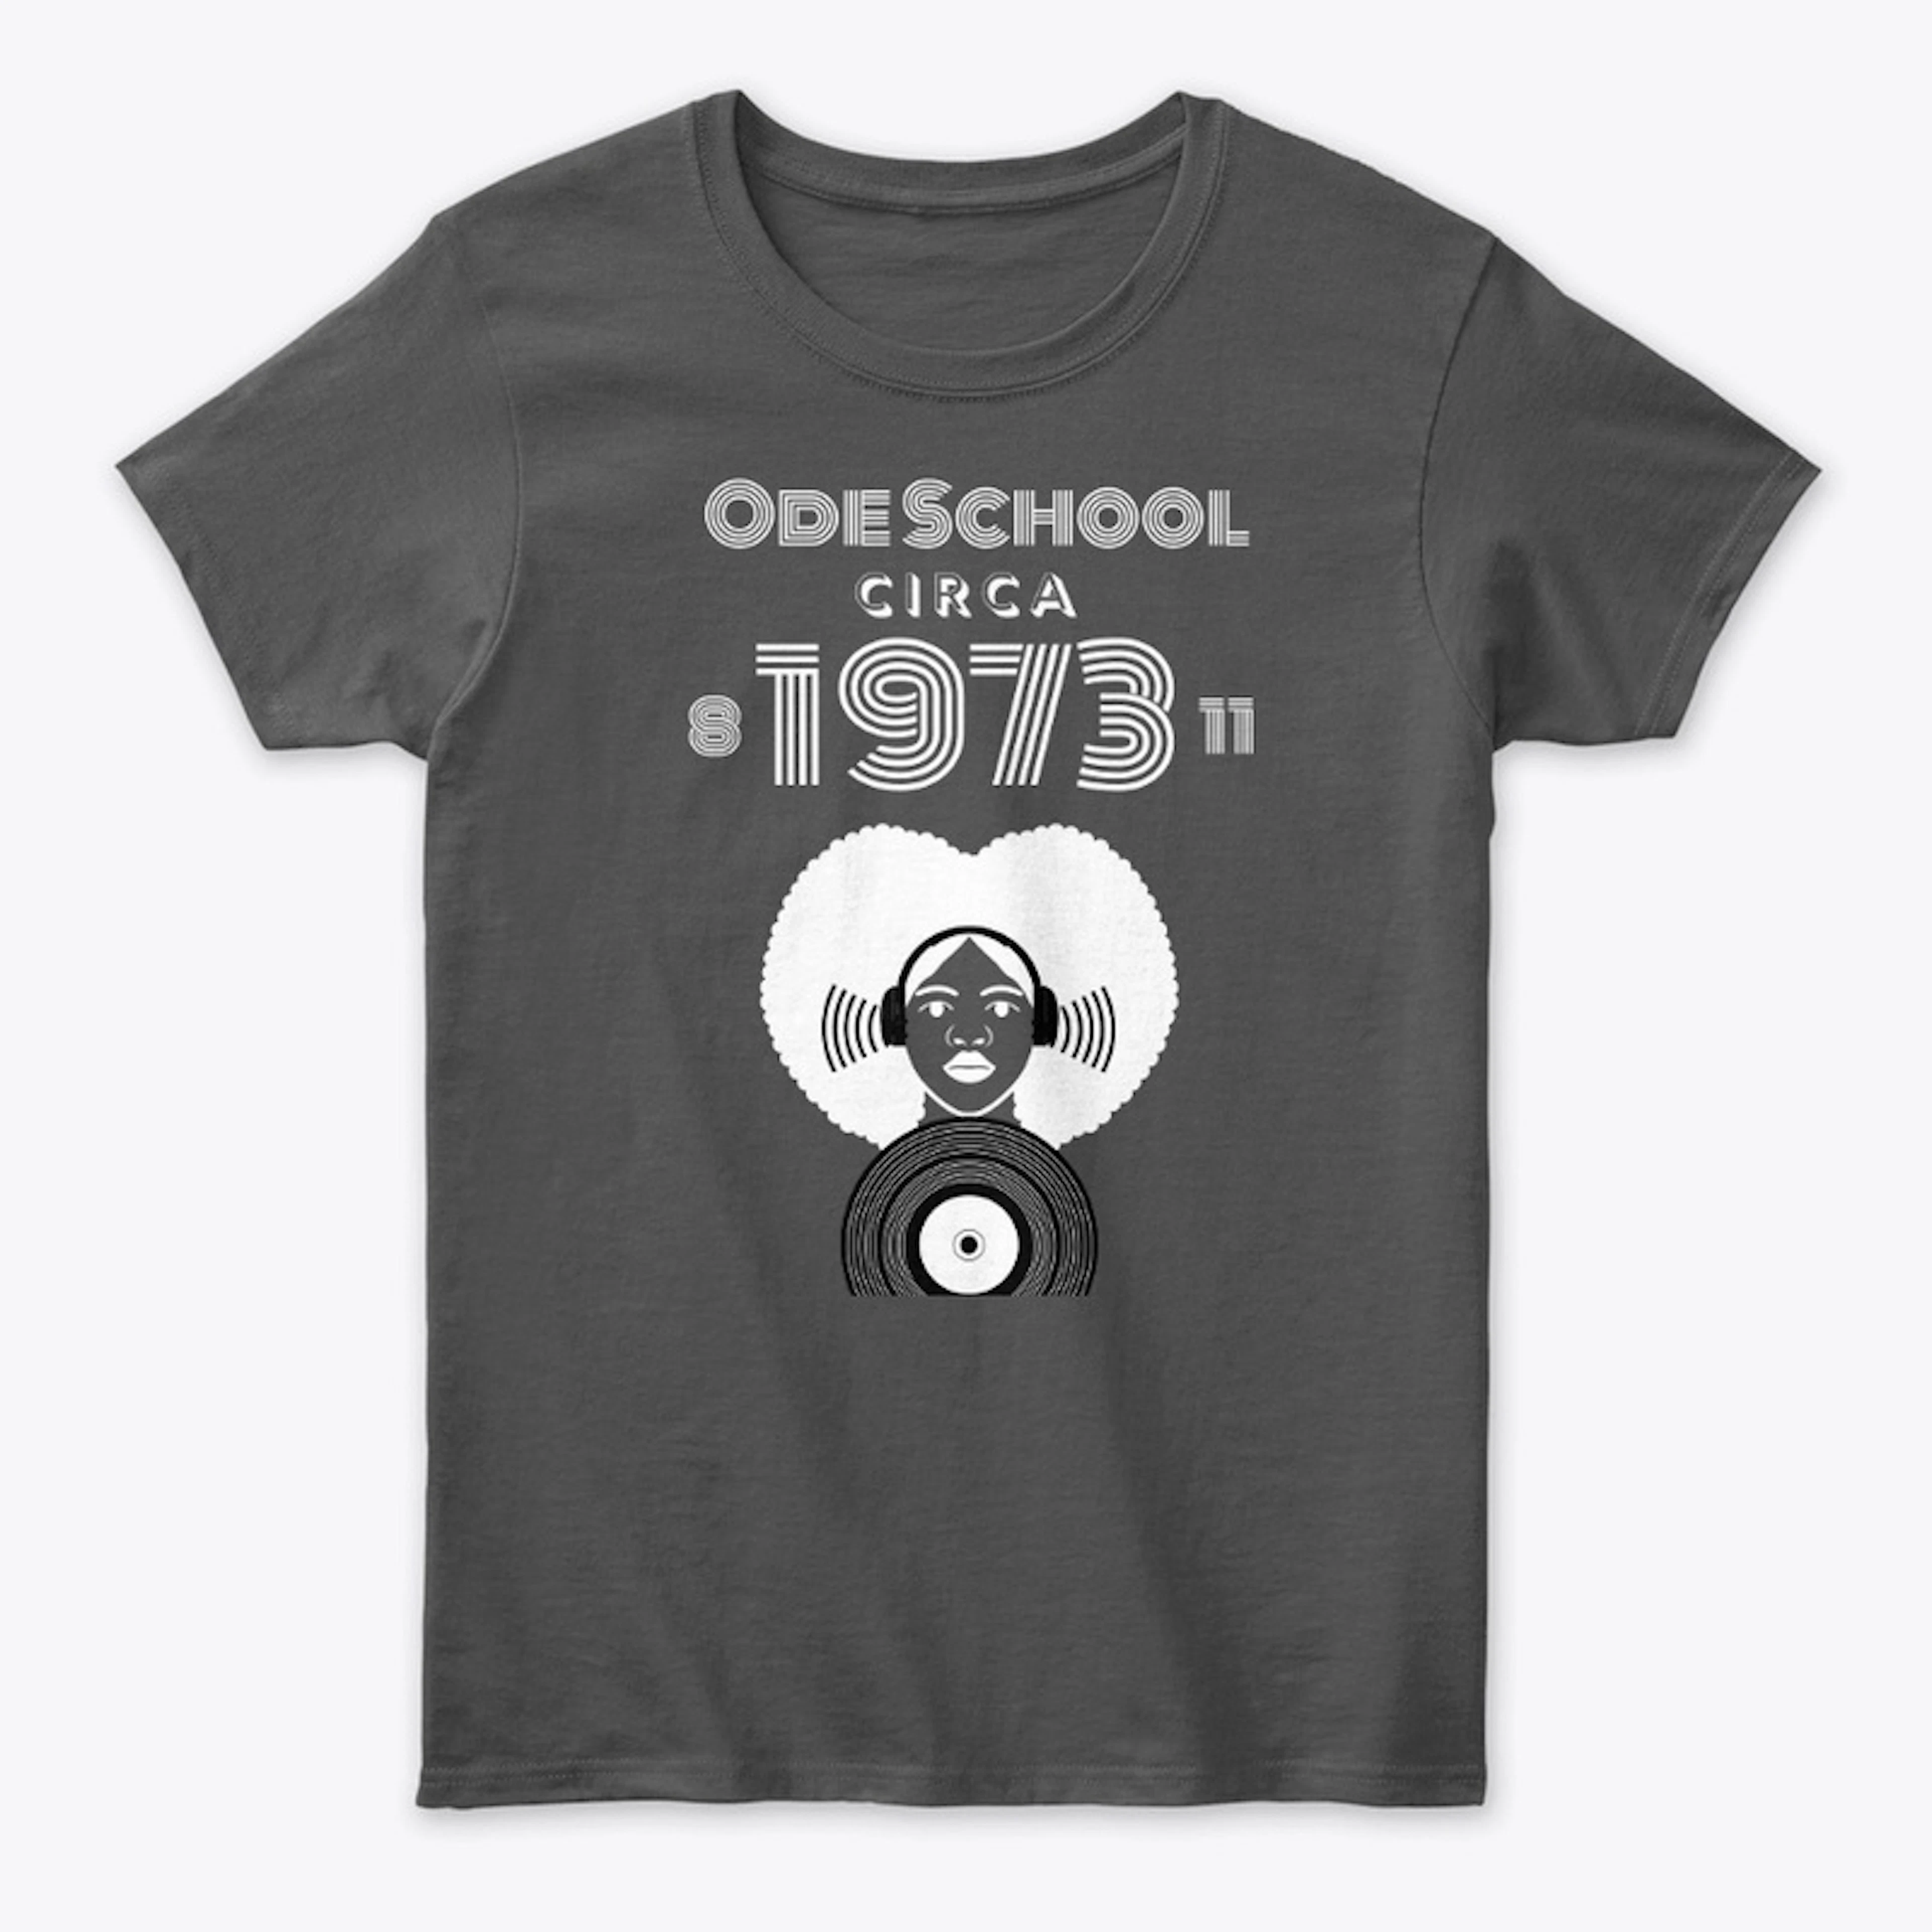 New Ode School Collection -For the Love